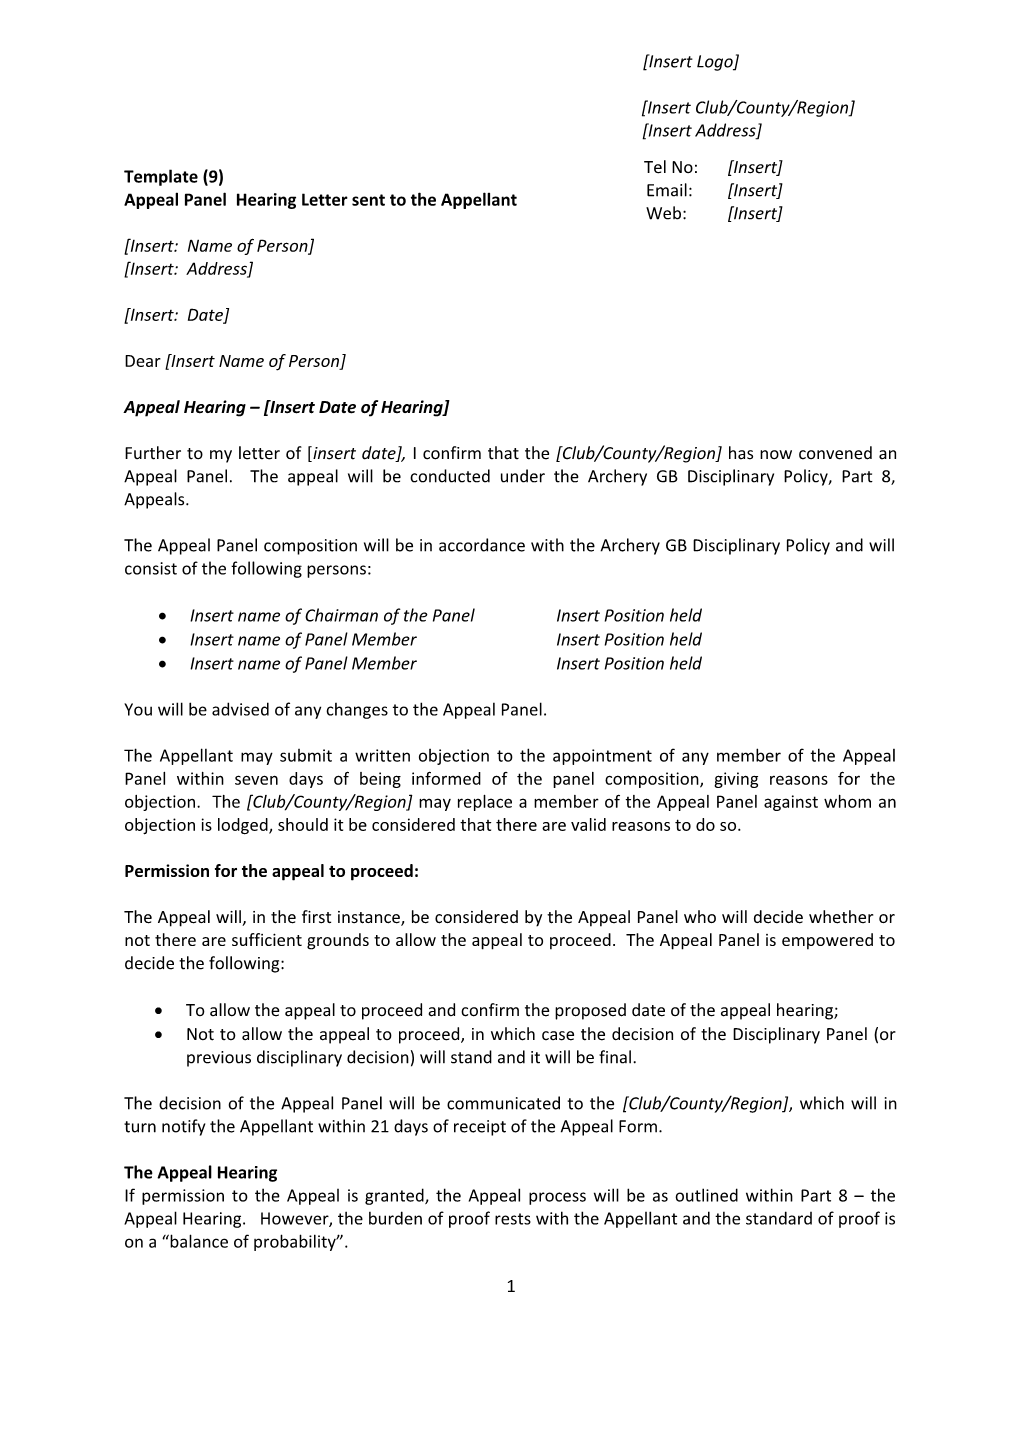 Appeal Panel Hearing Letter Sent to the Appellant